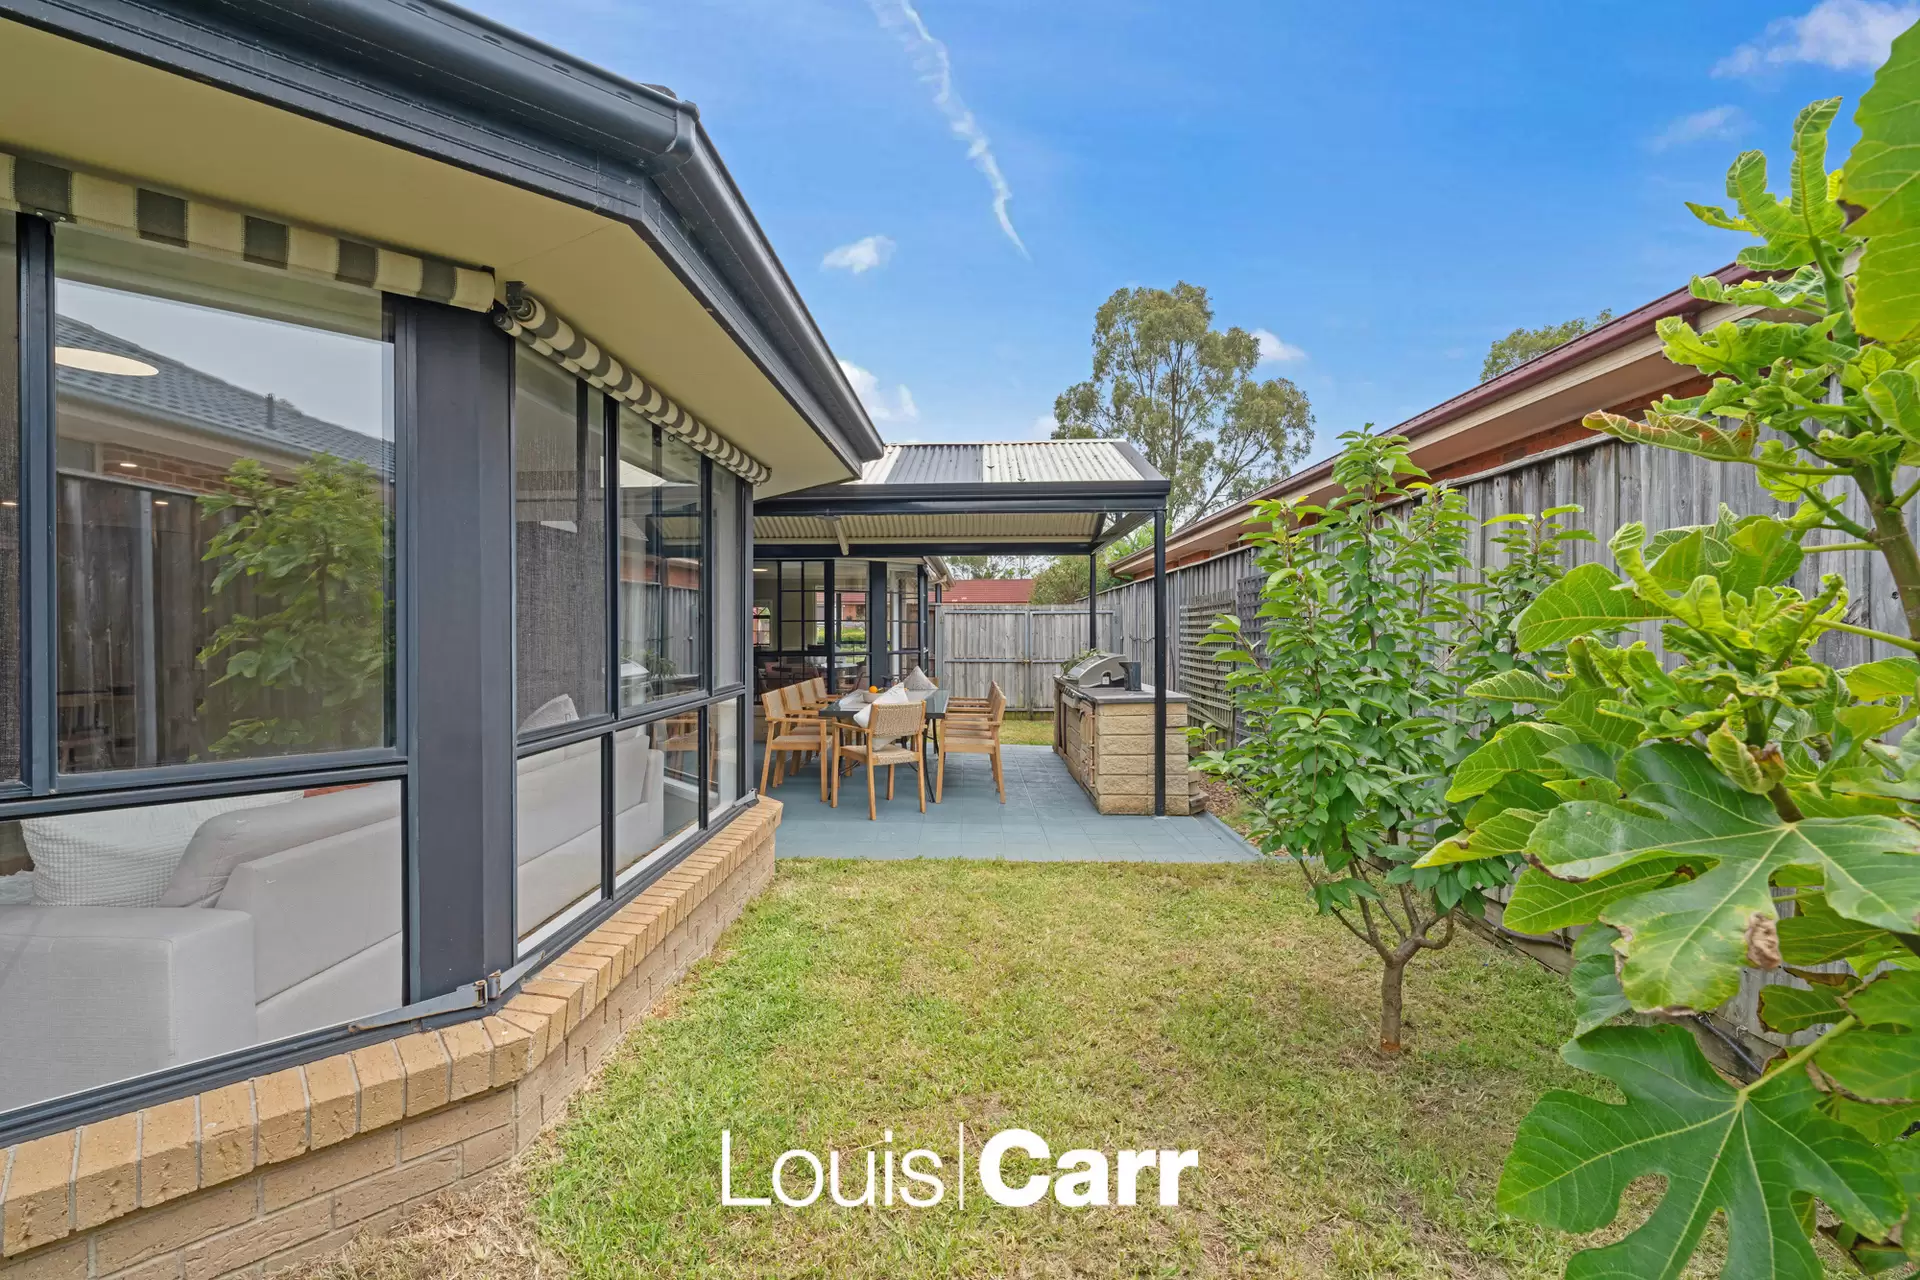 Photo #9: 33 Marsden Avenue, Kellyville - For Sale by Louis Carr Real Estate